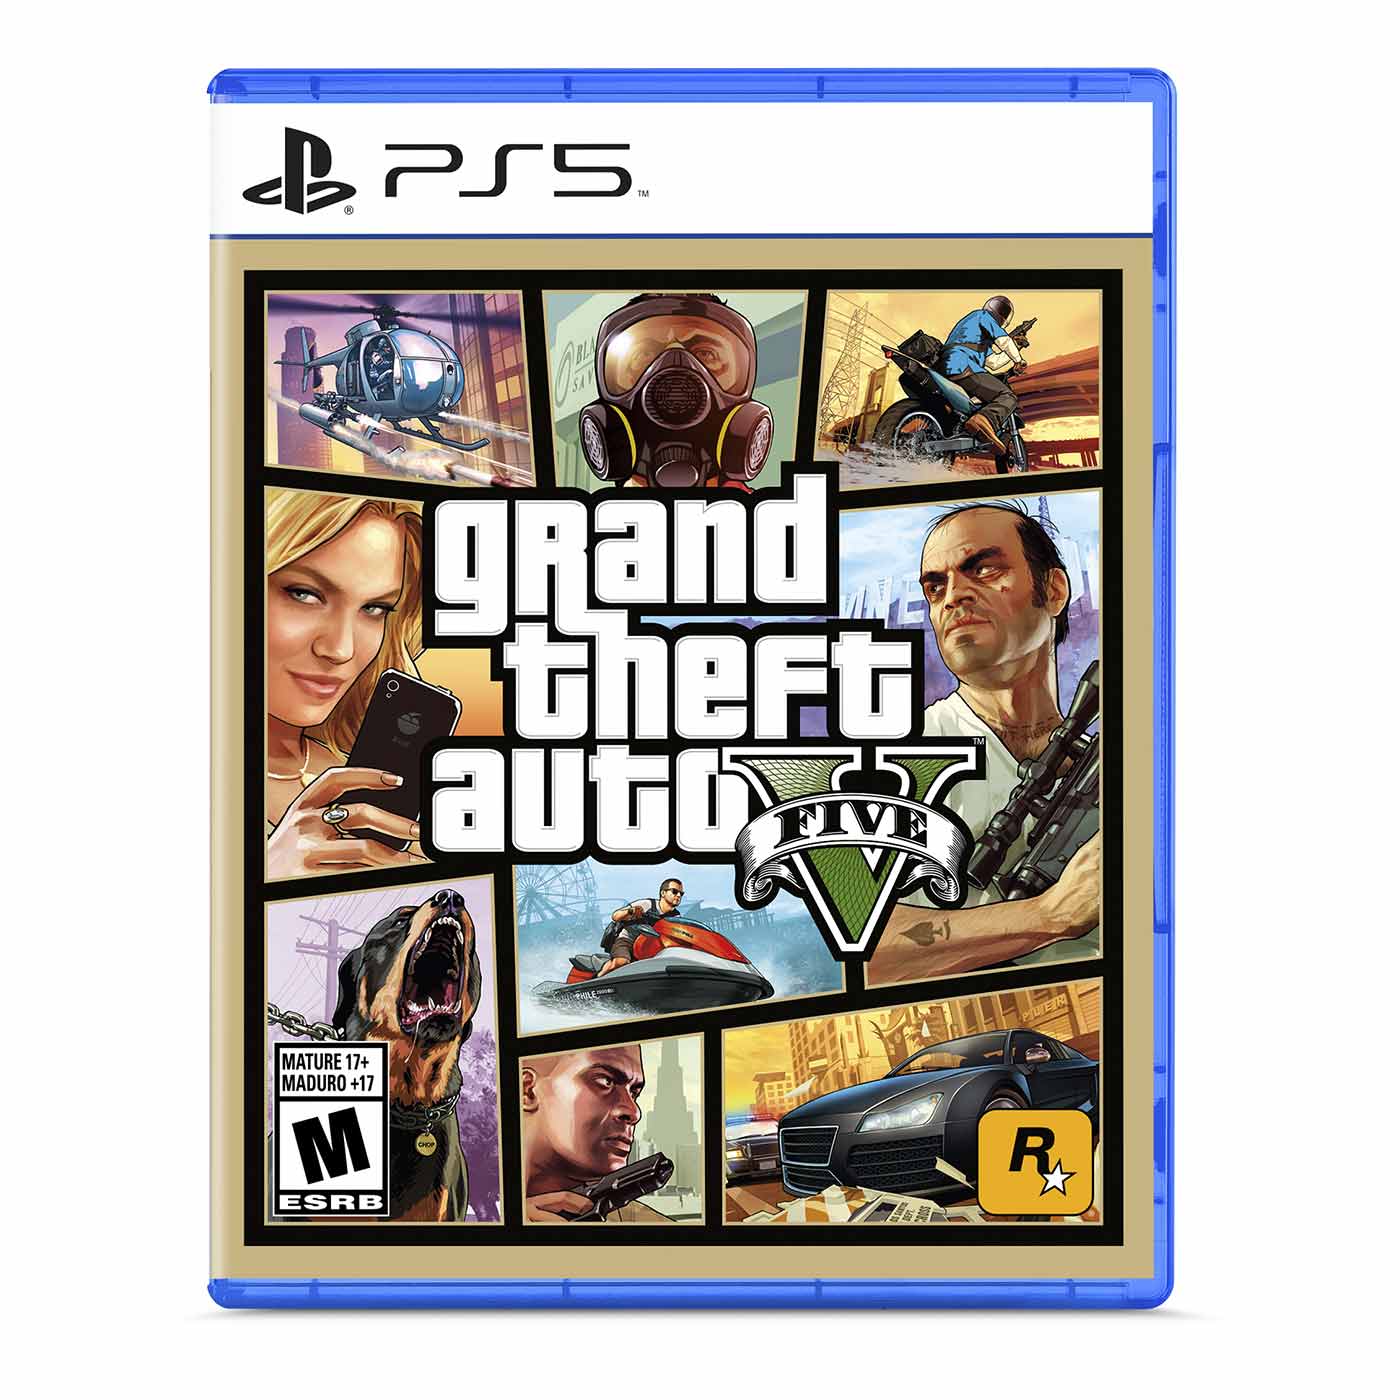 PS4® Grand Theft Auto V™  Sony Store Colombia - Sony Store Colombia